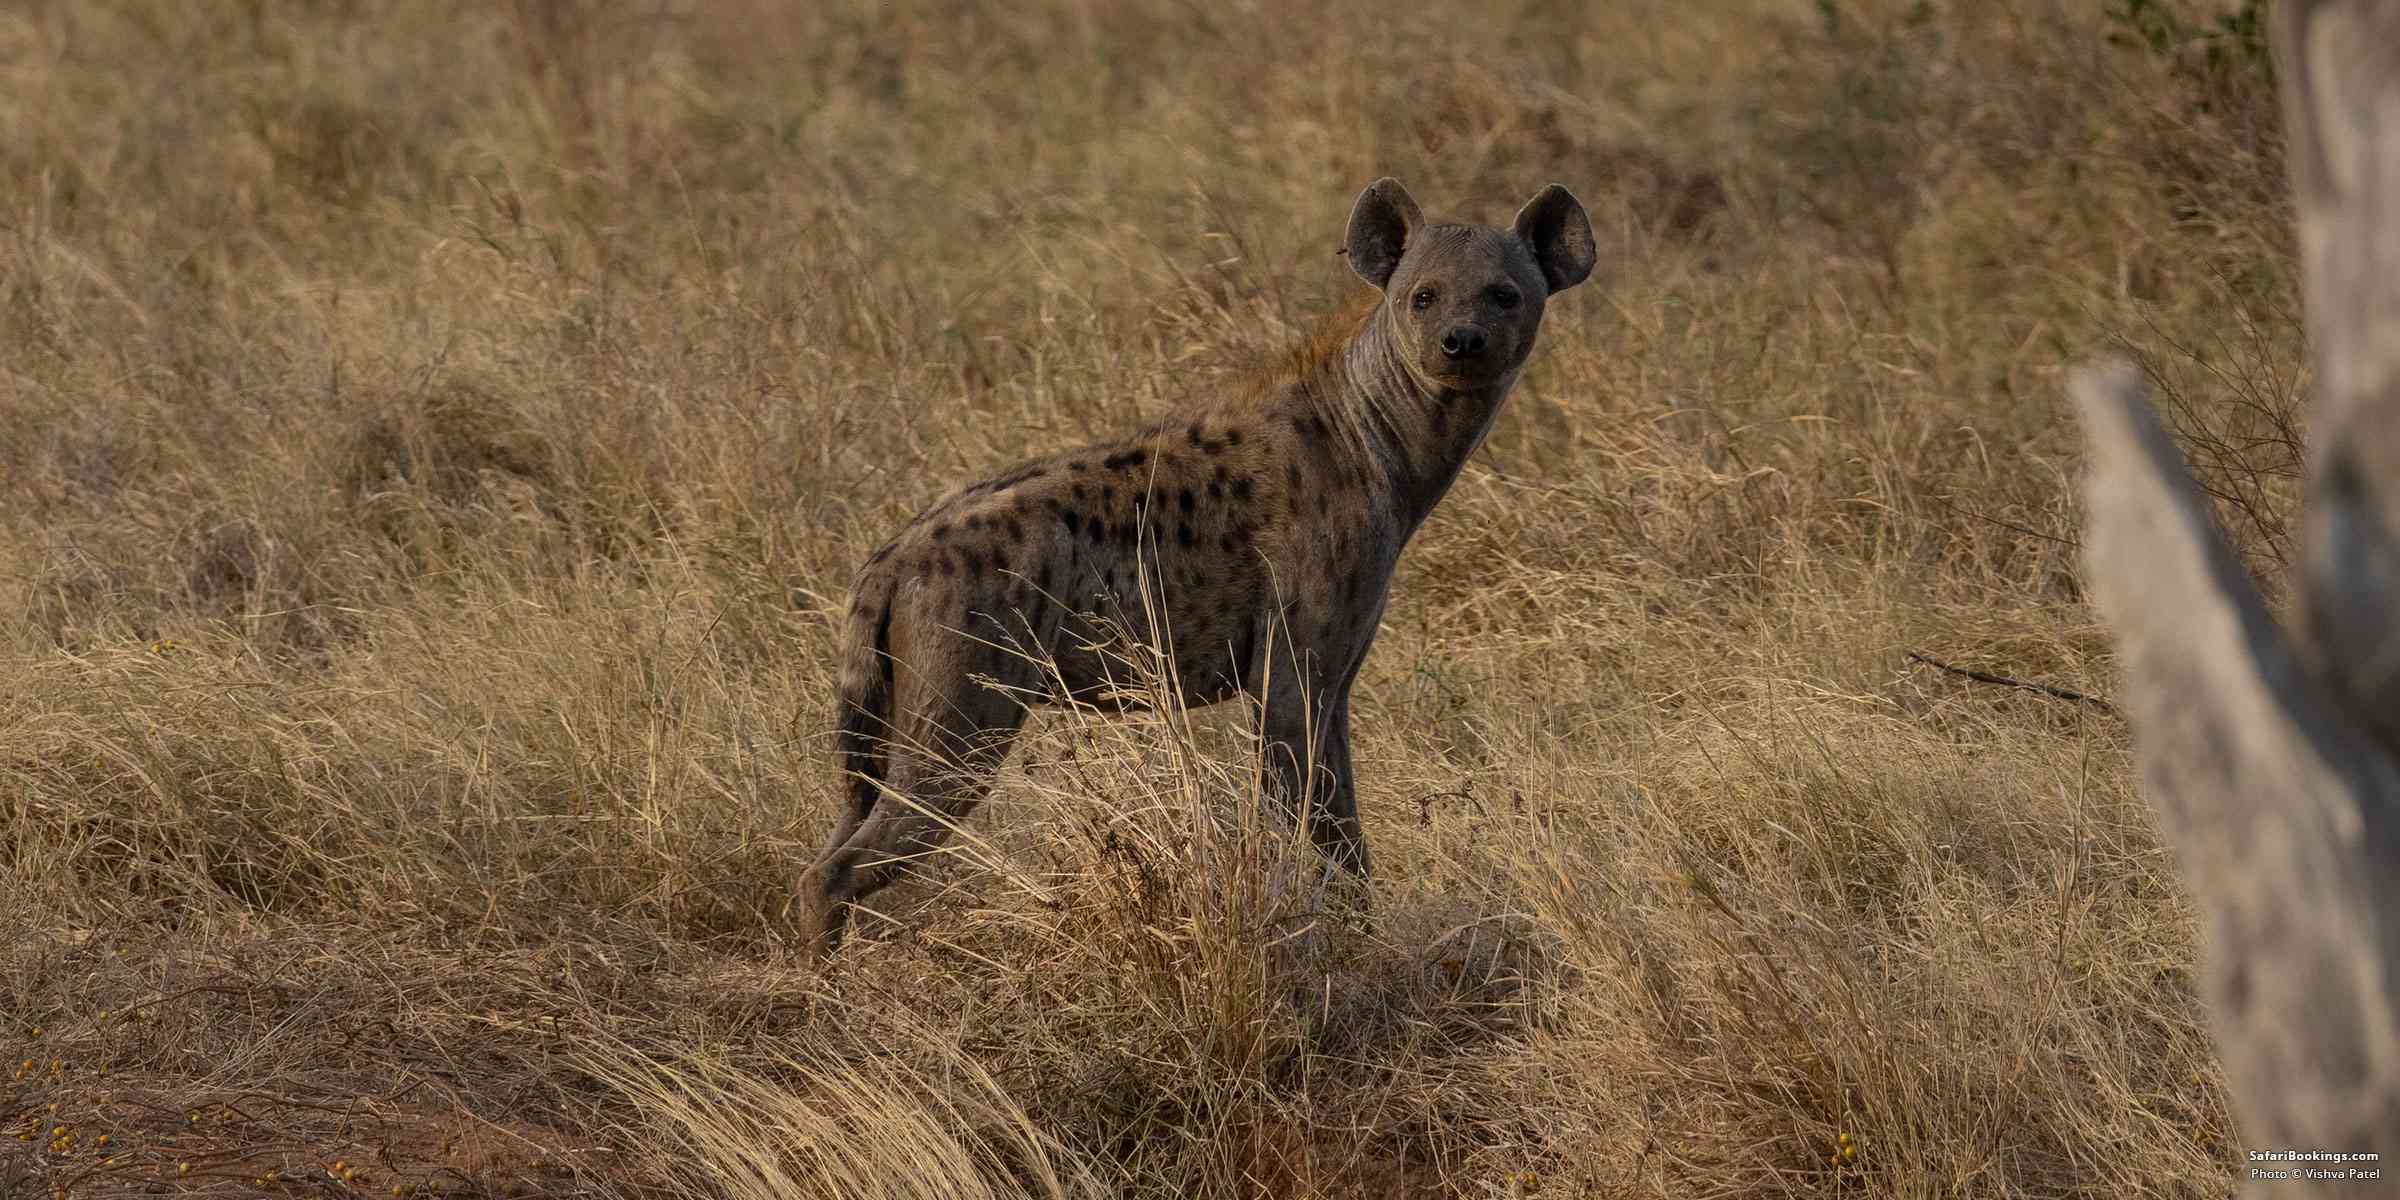 5 Fascinating Facts About the Spotted Hyena